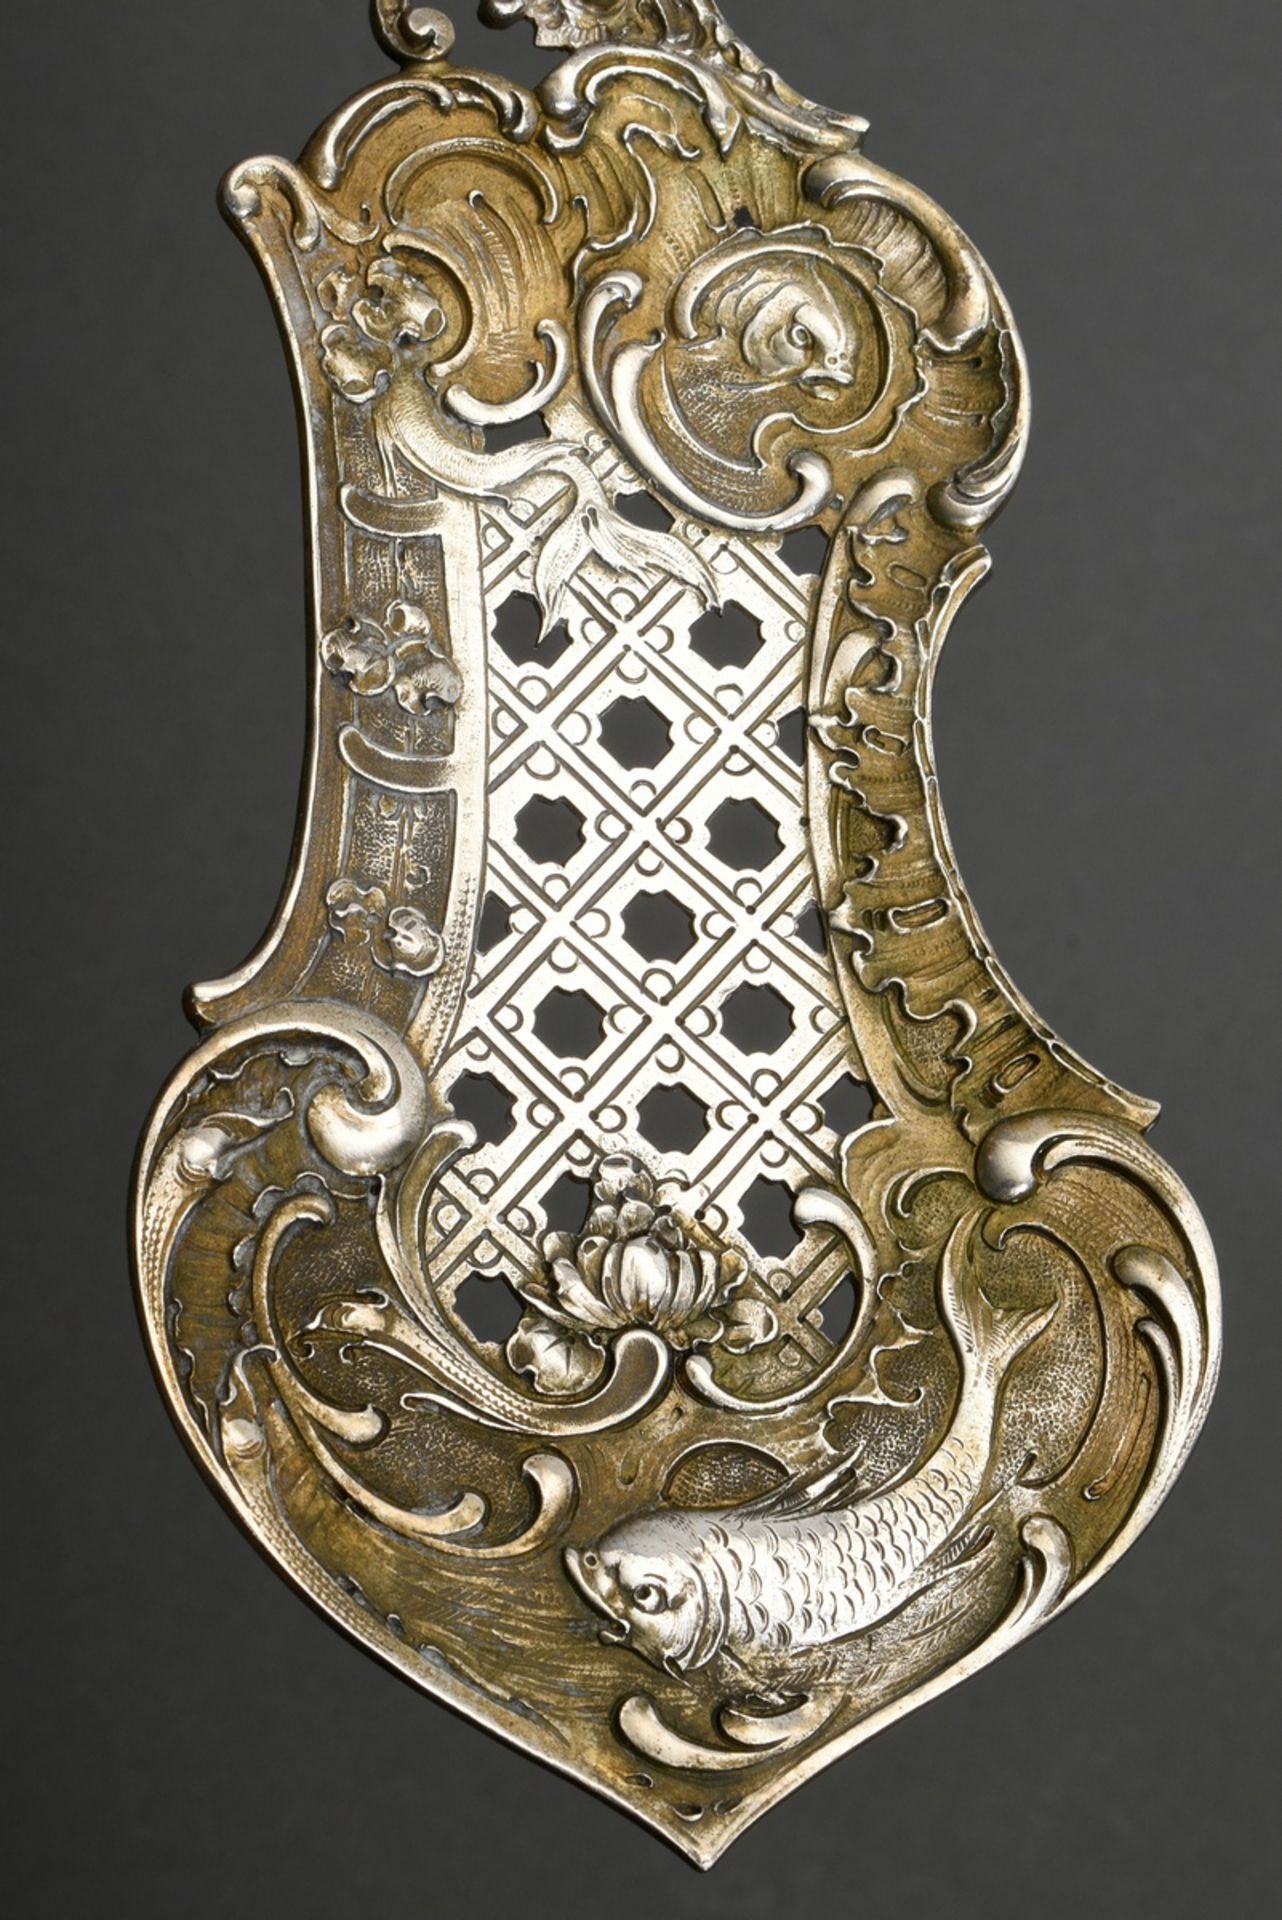 2 Pieces opulent Neo-Rococo fish serving cutlery with sculptural figurative handles and fish relief - Image 5 of 6